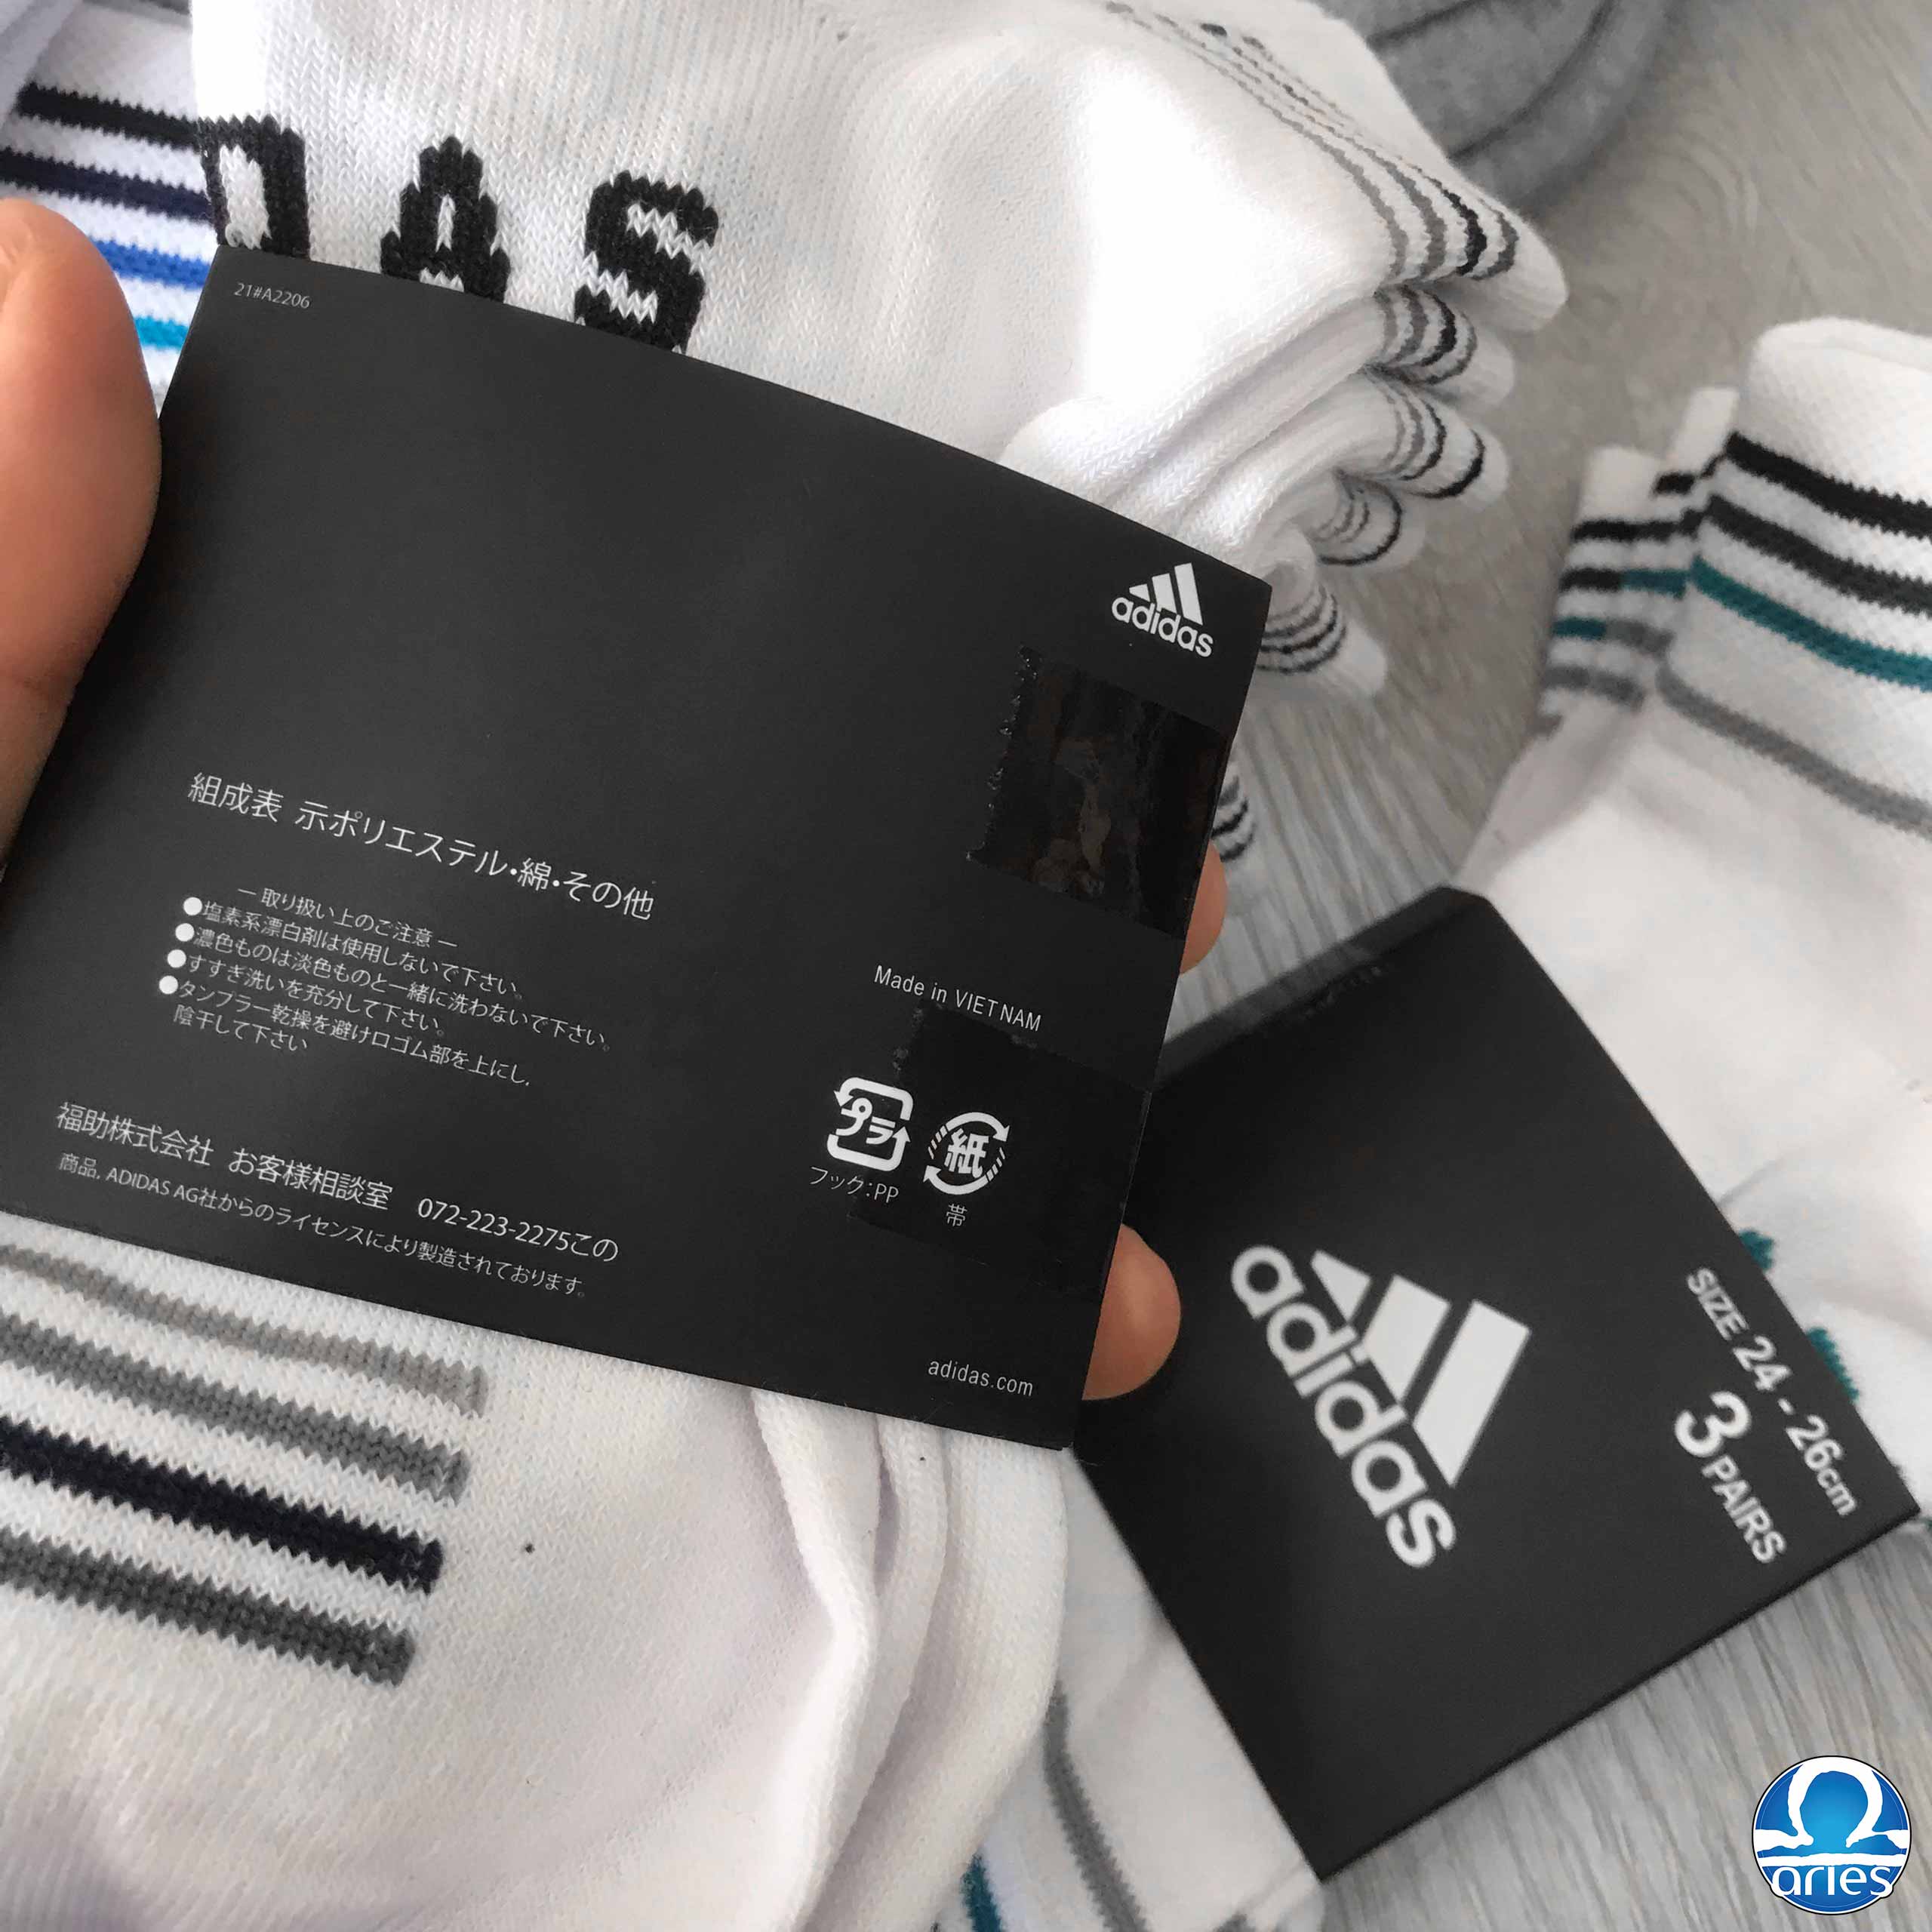 Adidas ankle socks pack 3 size 38-43